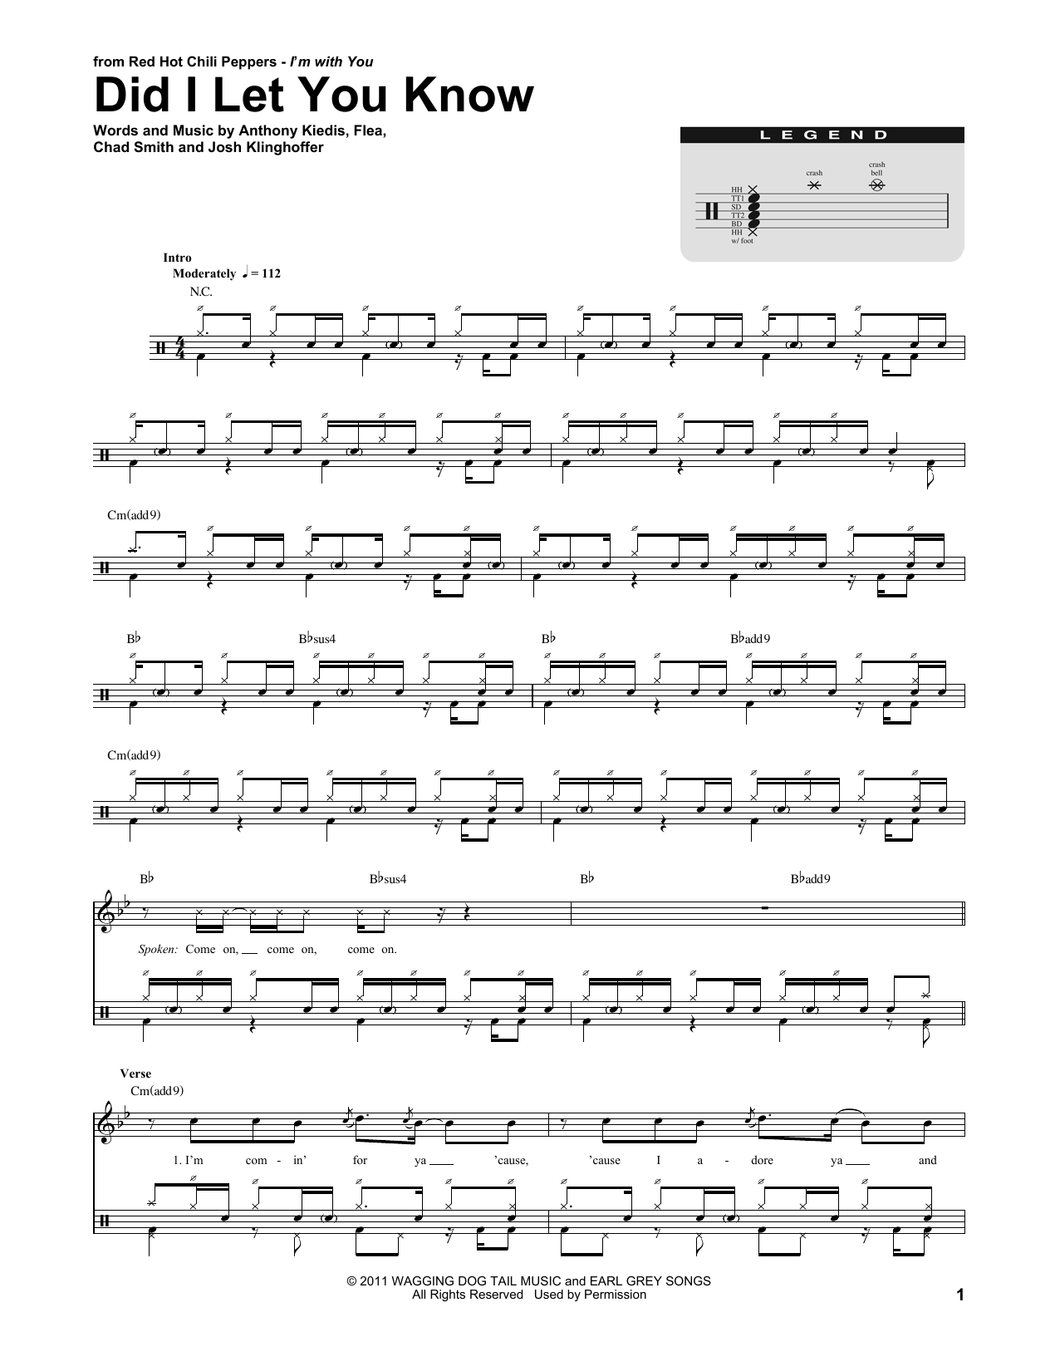 Did I Let You Know - Red Hot Chili Peppers - Full Drum Transcription / Drum Sheet Music - SheetMusicDirect DT